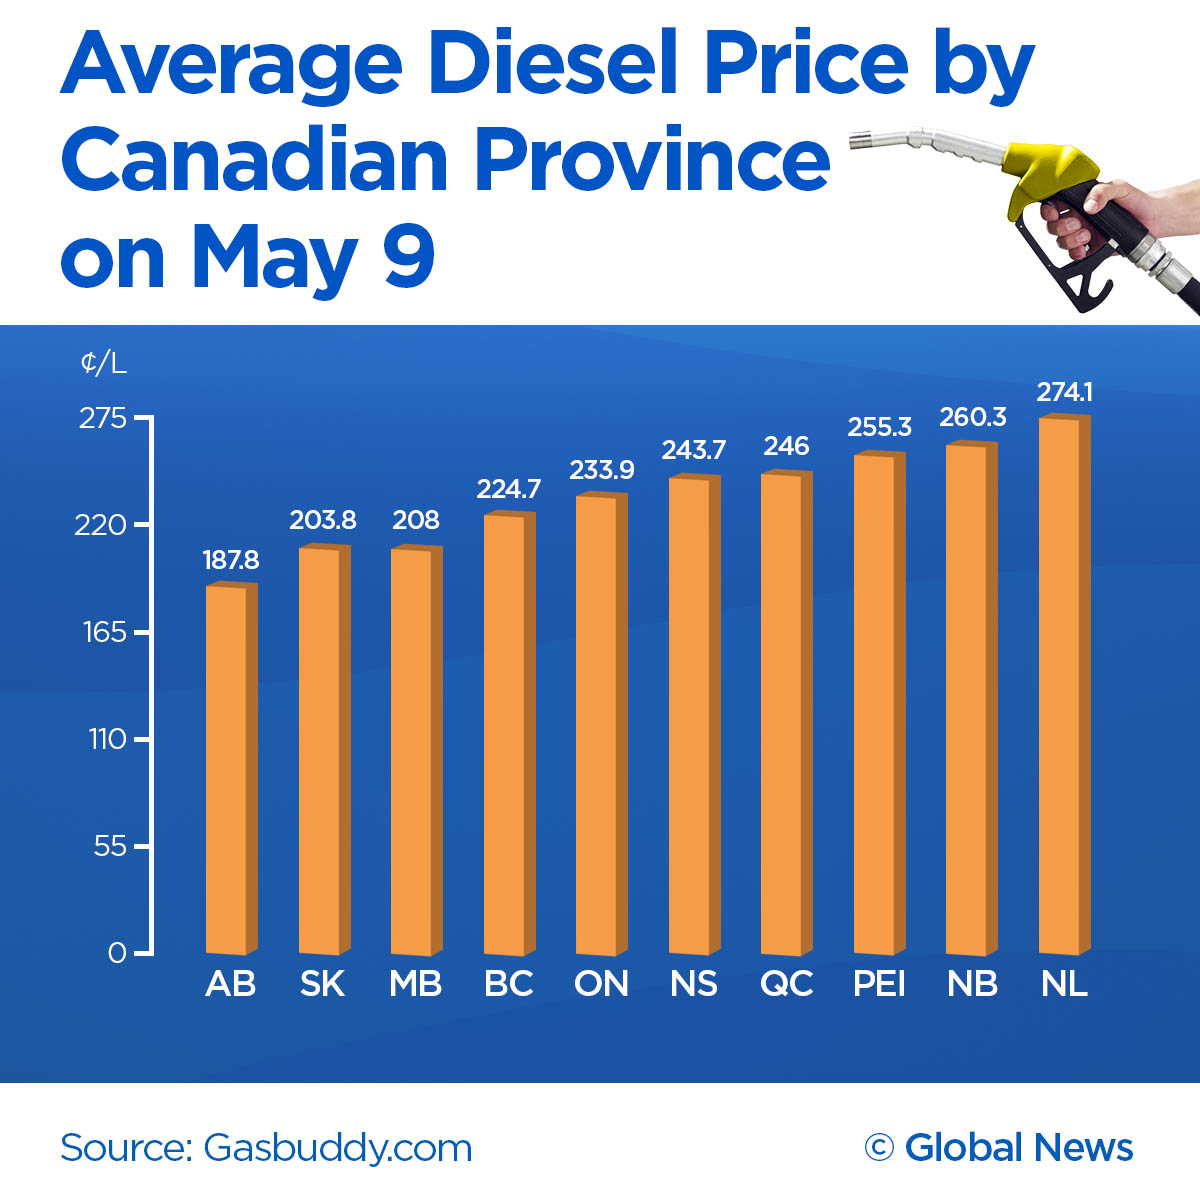 Think gas prices are high? Diesel is even higher. Here’s why that